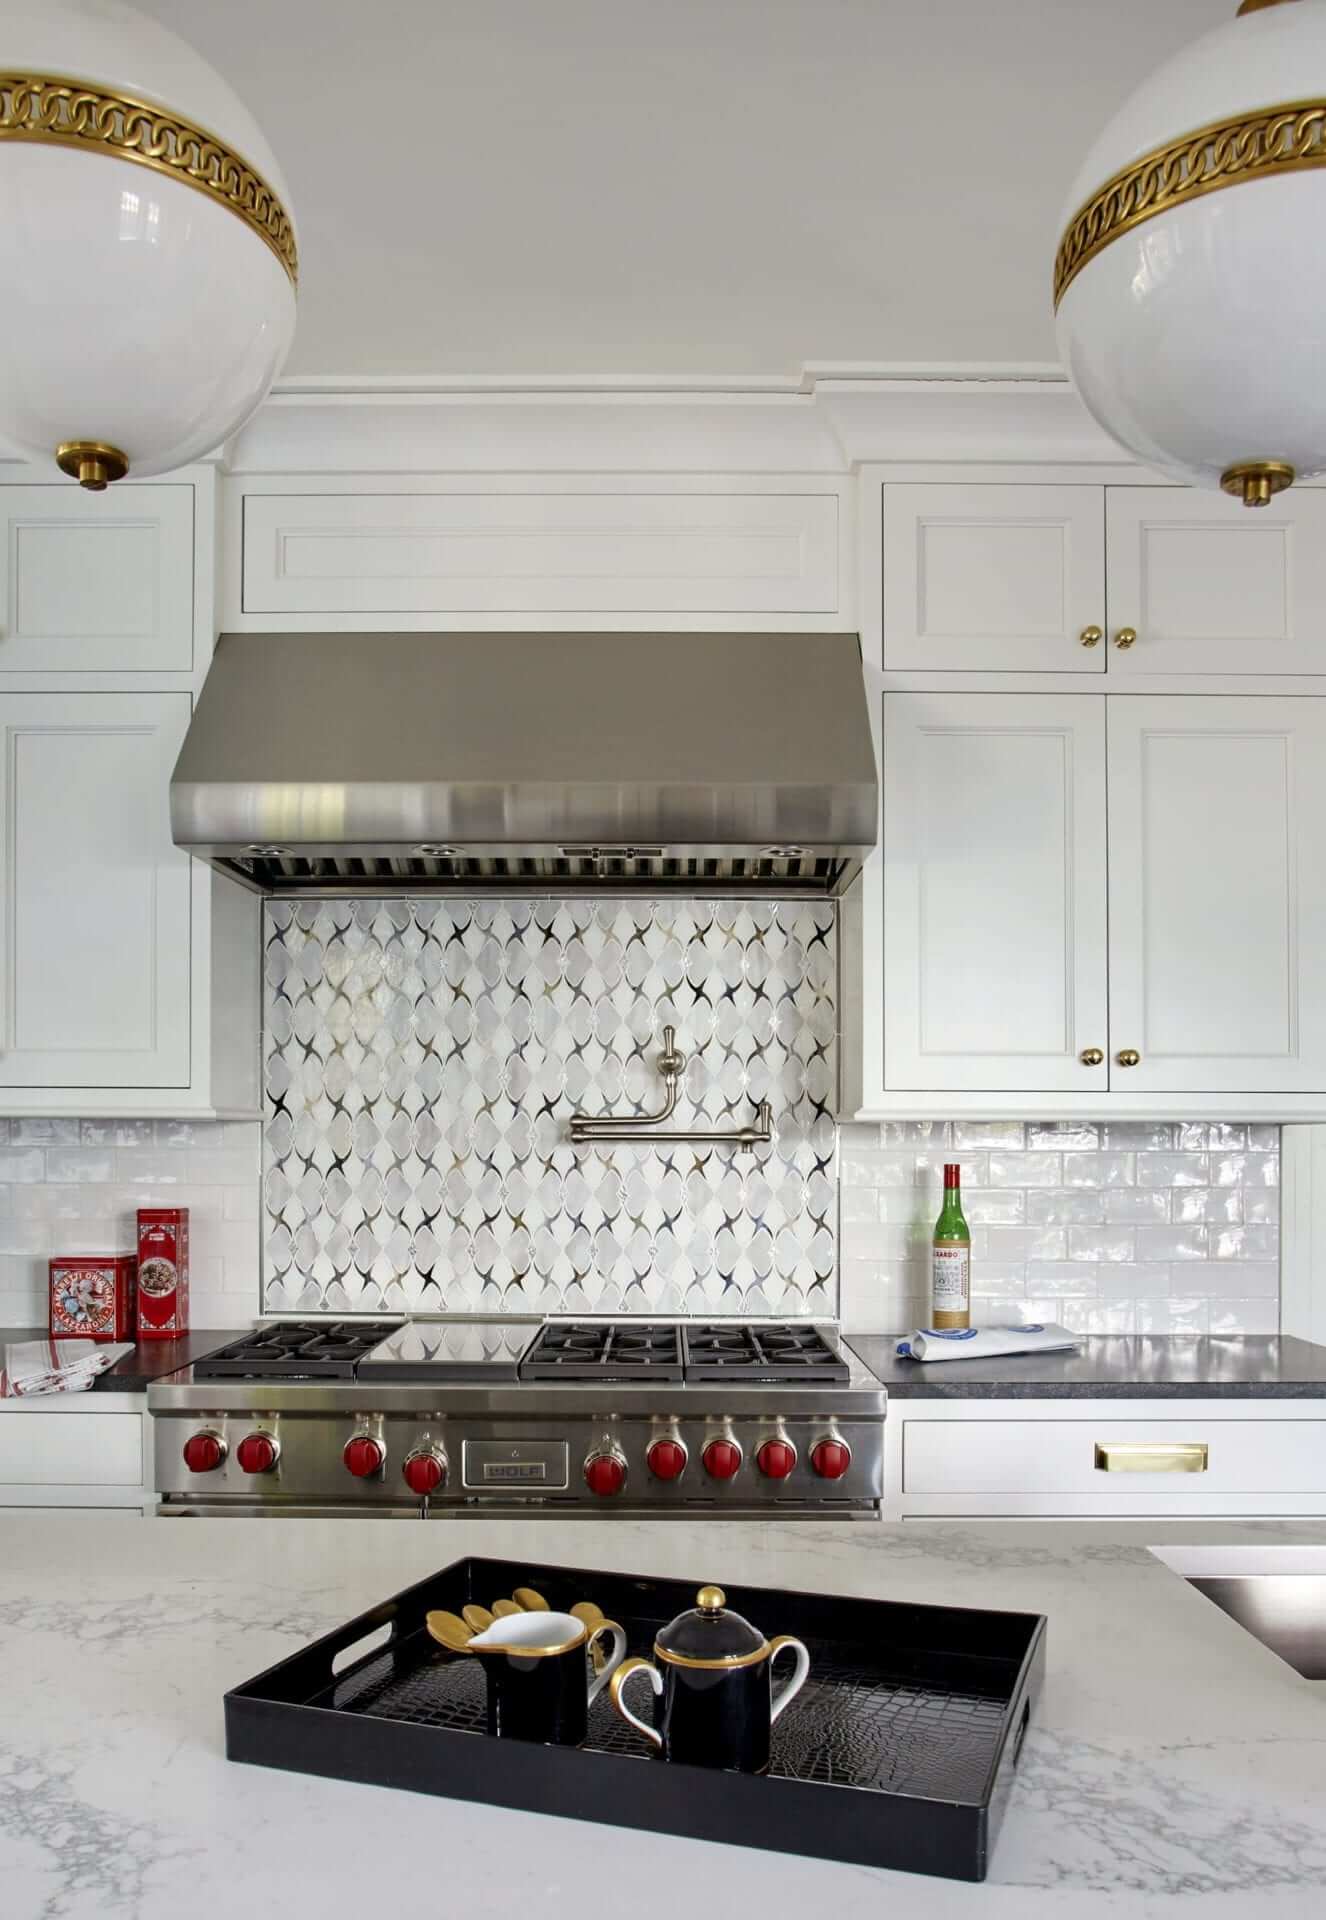 Art Deco inspired kitchen features white Bilotta cabinetry with brass hardware and brass accented lighting.